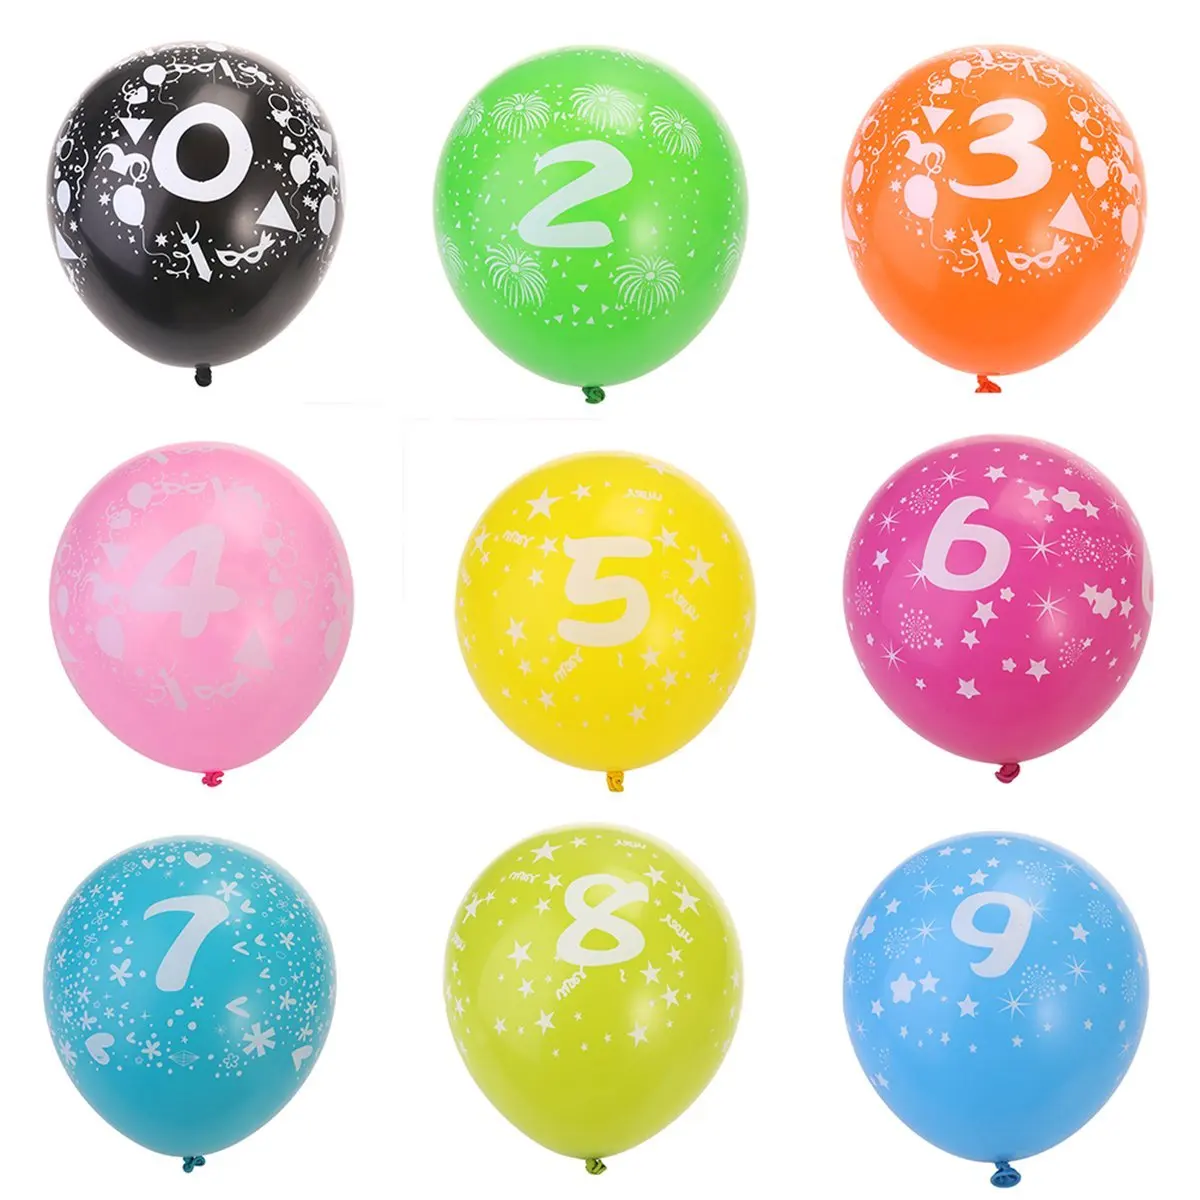 12 inches Quality Latex Balloons With Printed Numbers Birthday Party 10 Pcs 